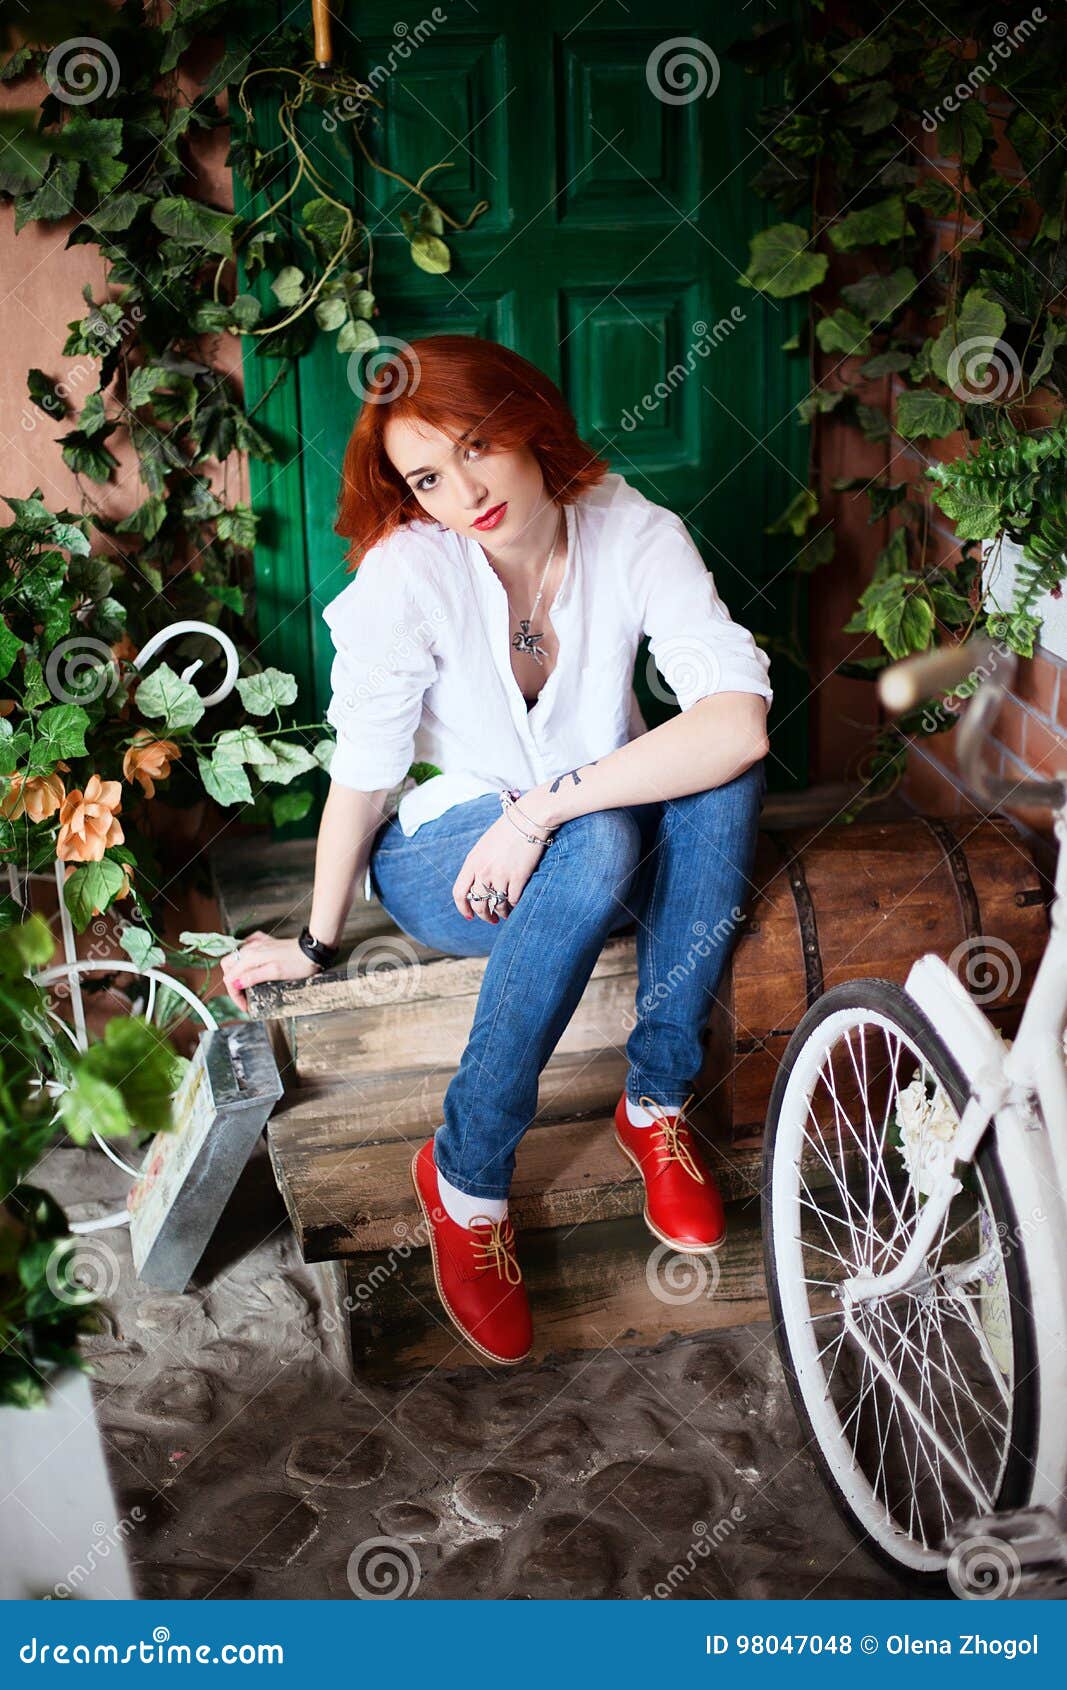 Lifestyle Portrait of Red Head Girl Wearing Blue Jeans, White Shirt and Red Shoes Stock Photo - of indoor, lifestyle: 98047048